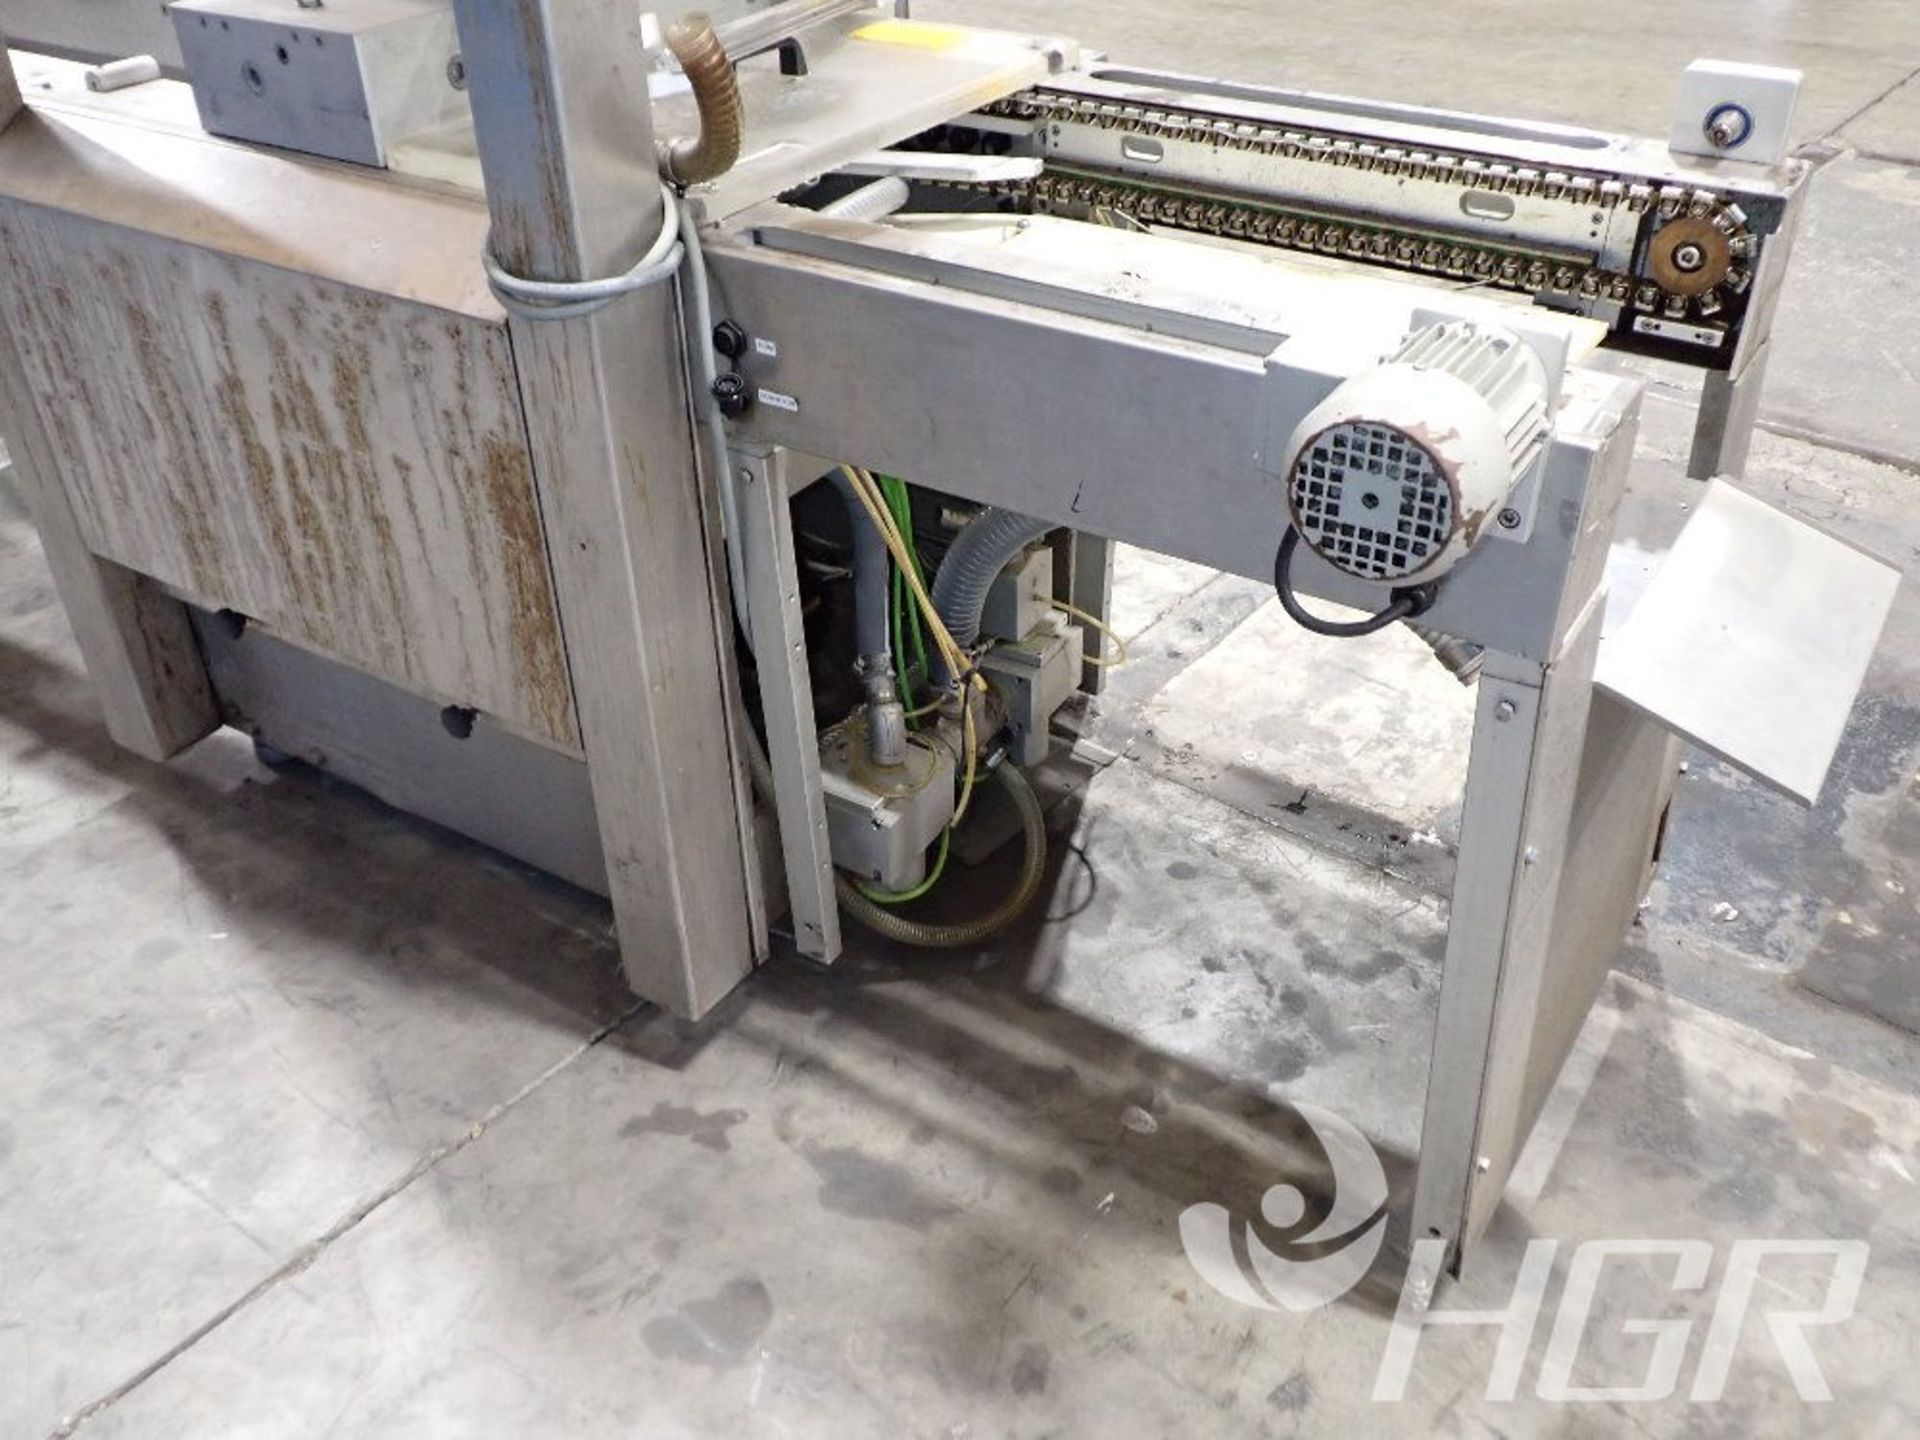 VC999 PACKAGING ROLL FED THERMOFORMER, Model RS420, Date: n/a; s/n RS2005225240, Approx. Capacity: - Image 7 of 14